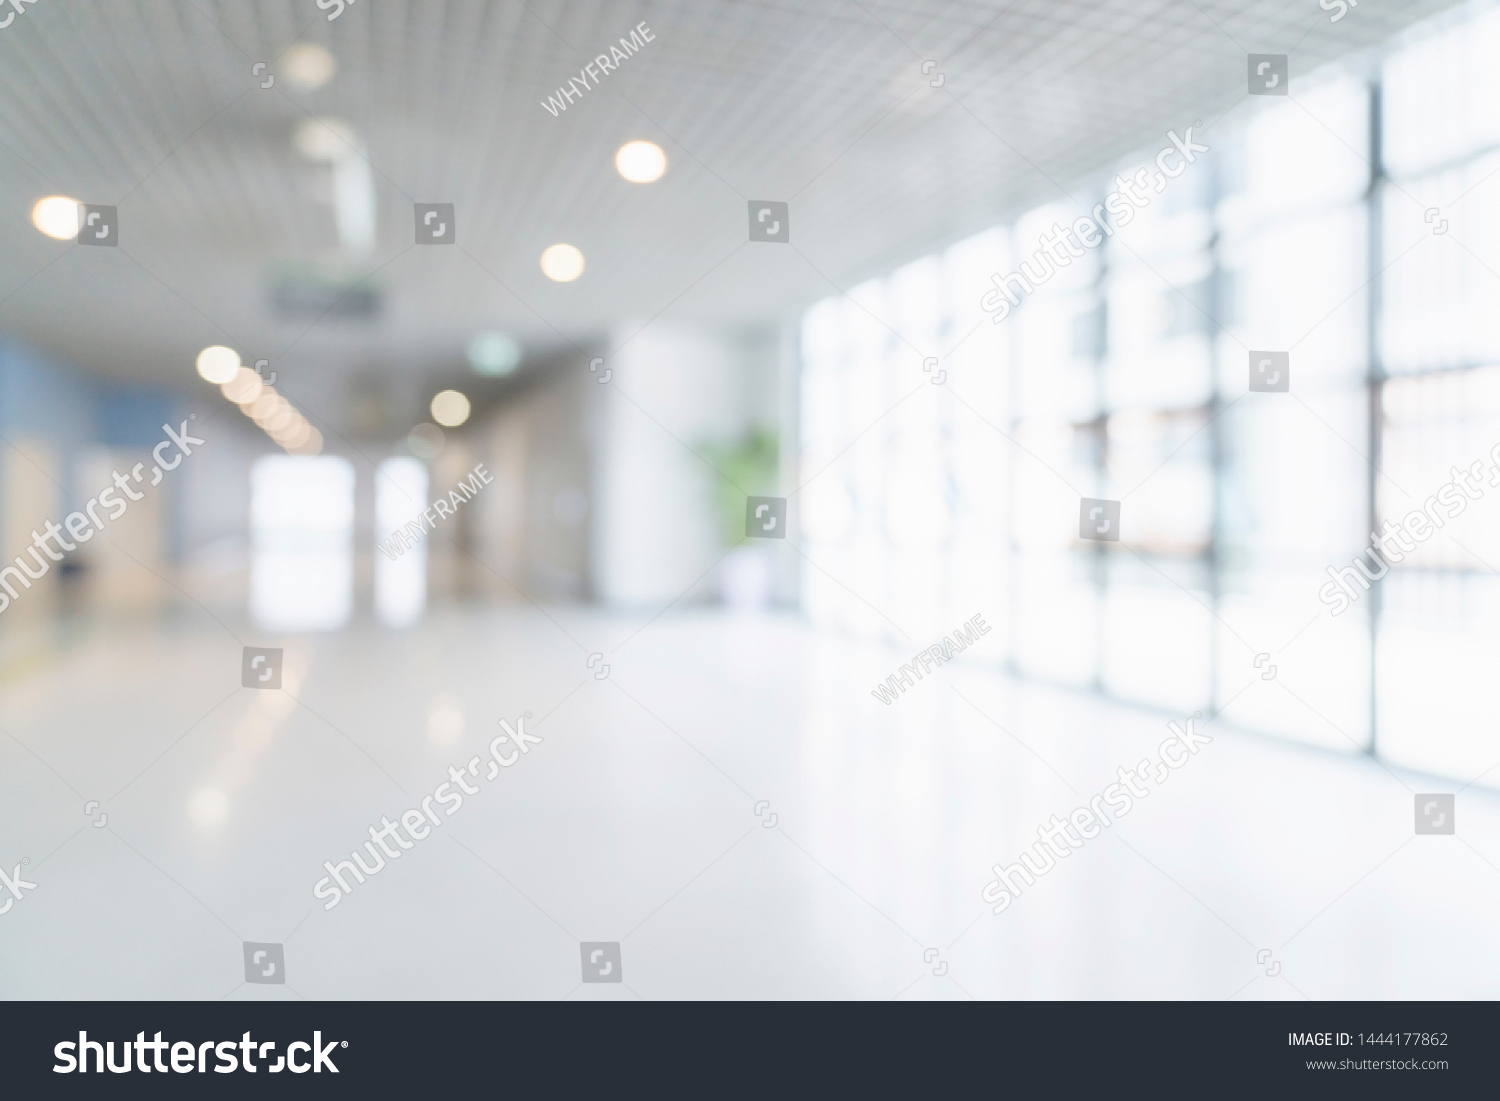 blur image background of corridor in hospital or clinic image #1444177862